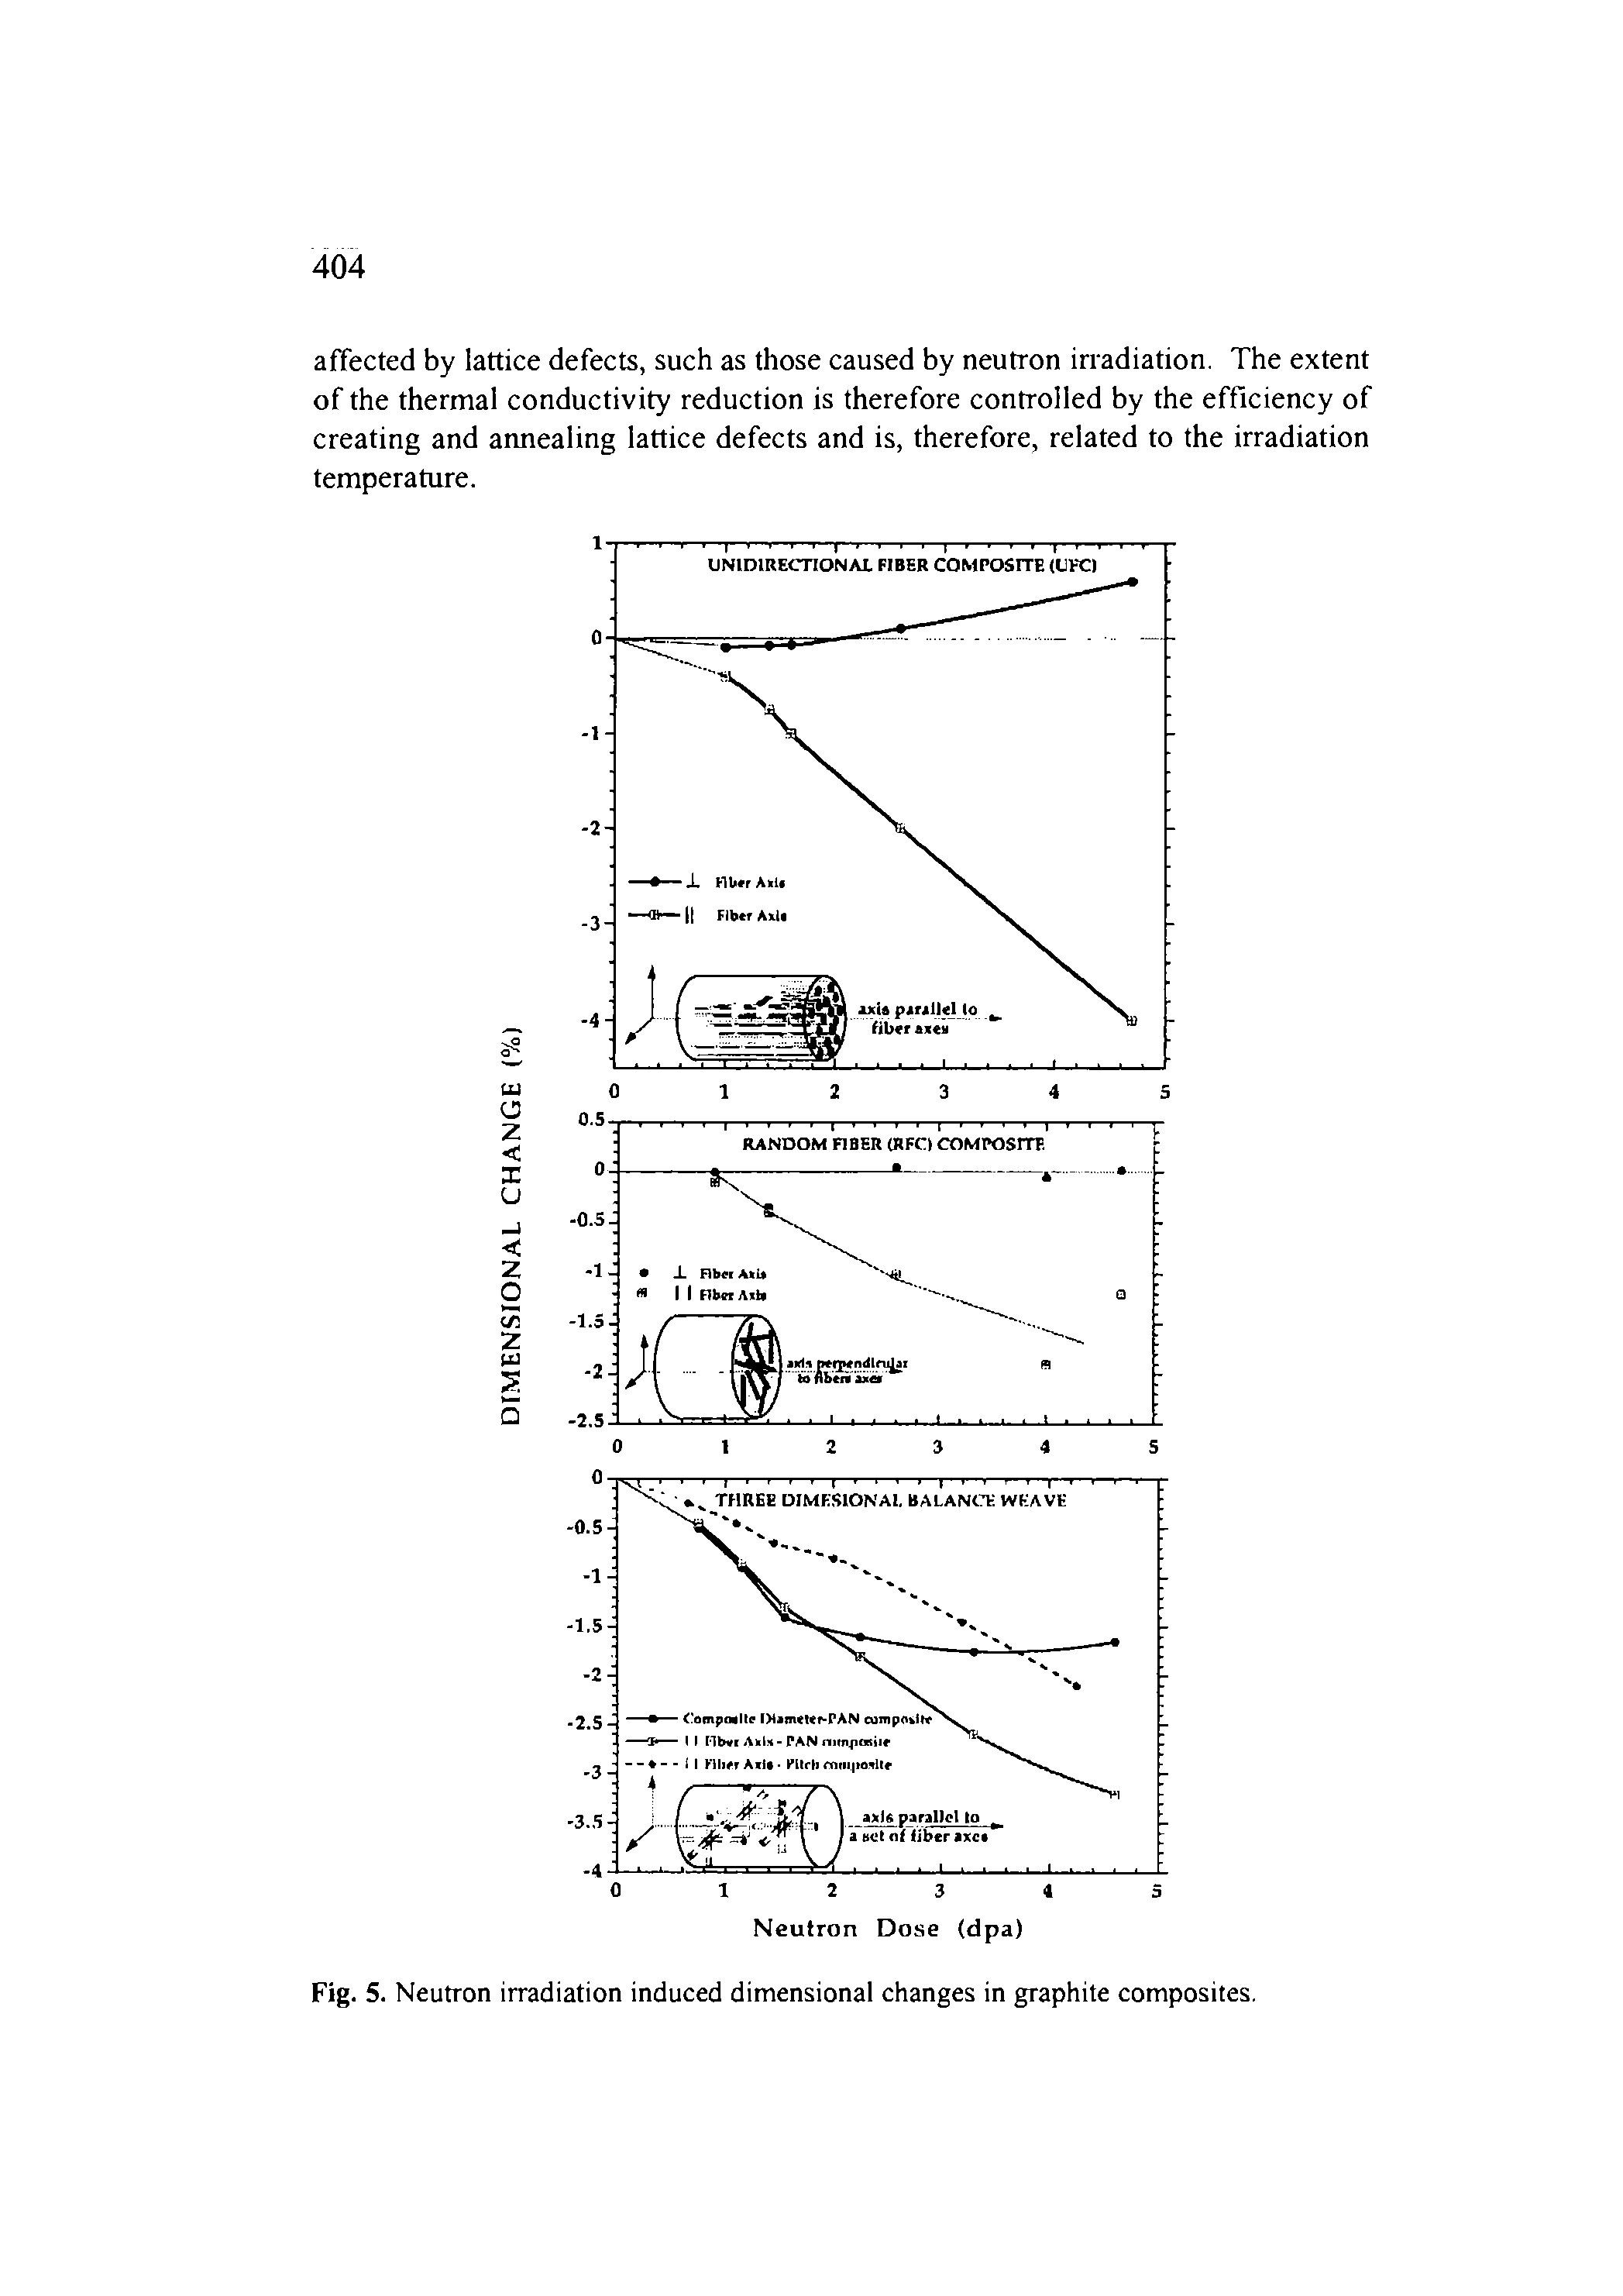 Fig. 5. Neutron irradiation induced dimensional changes in graphite composites.